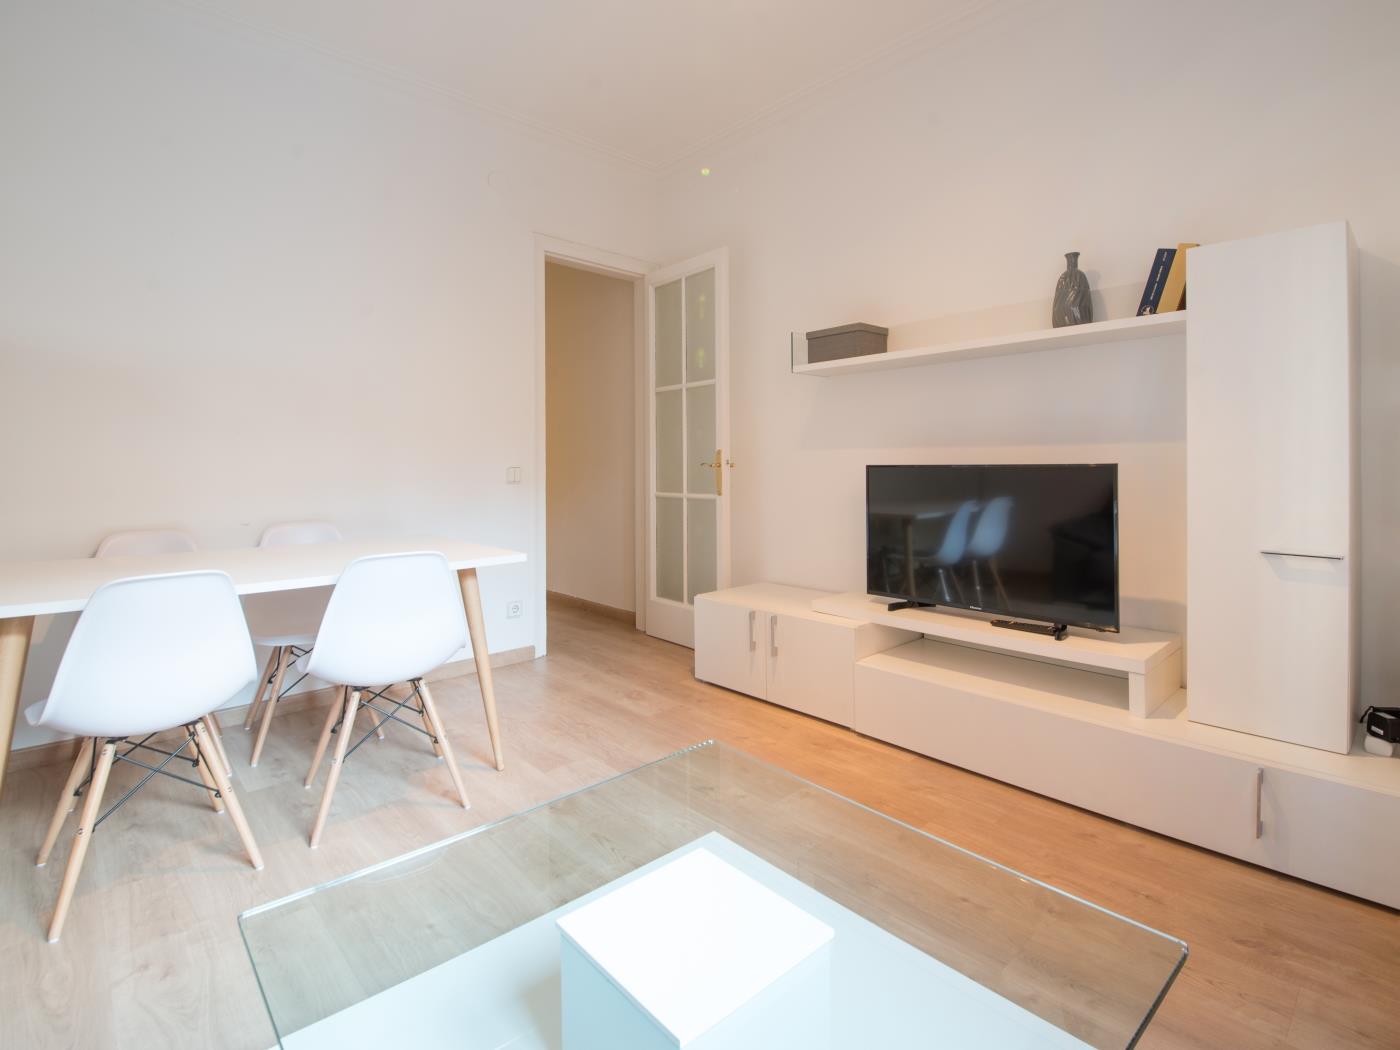 Furnished and equipped flat for seasons in Putxet with terrace - My Space Barcelona Apartments